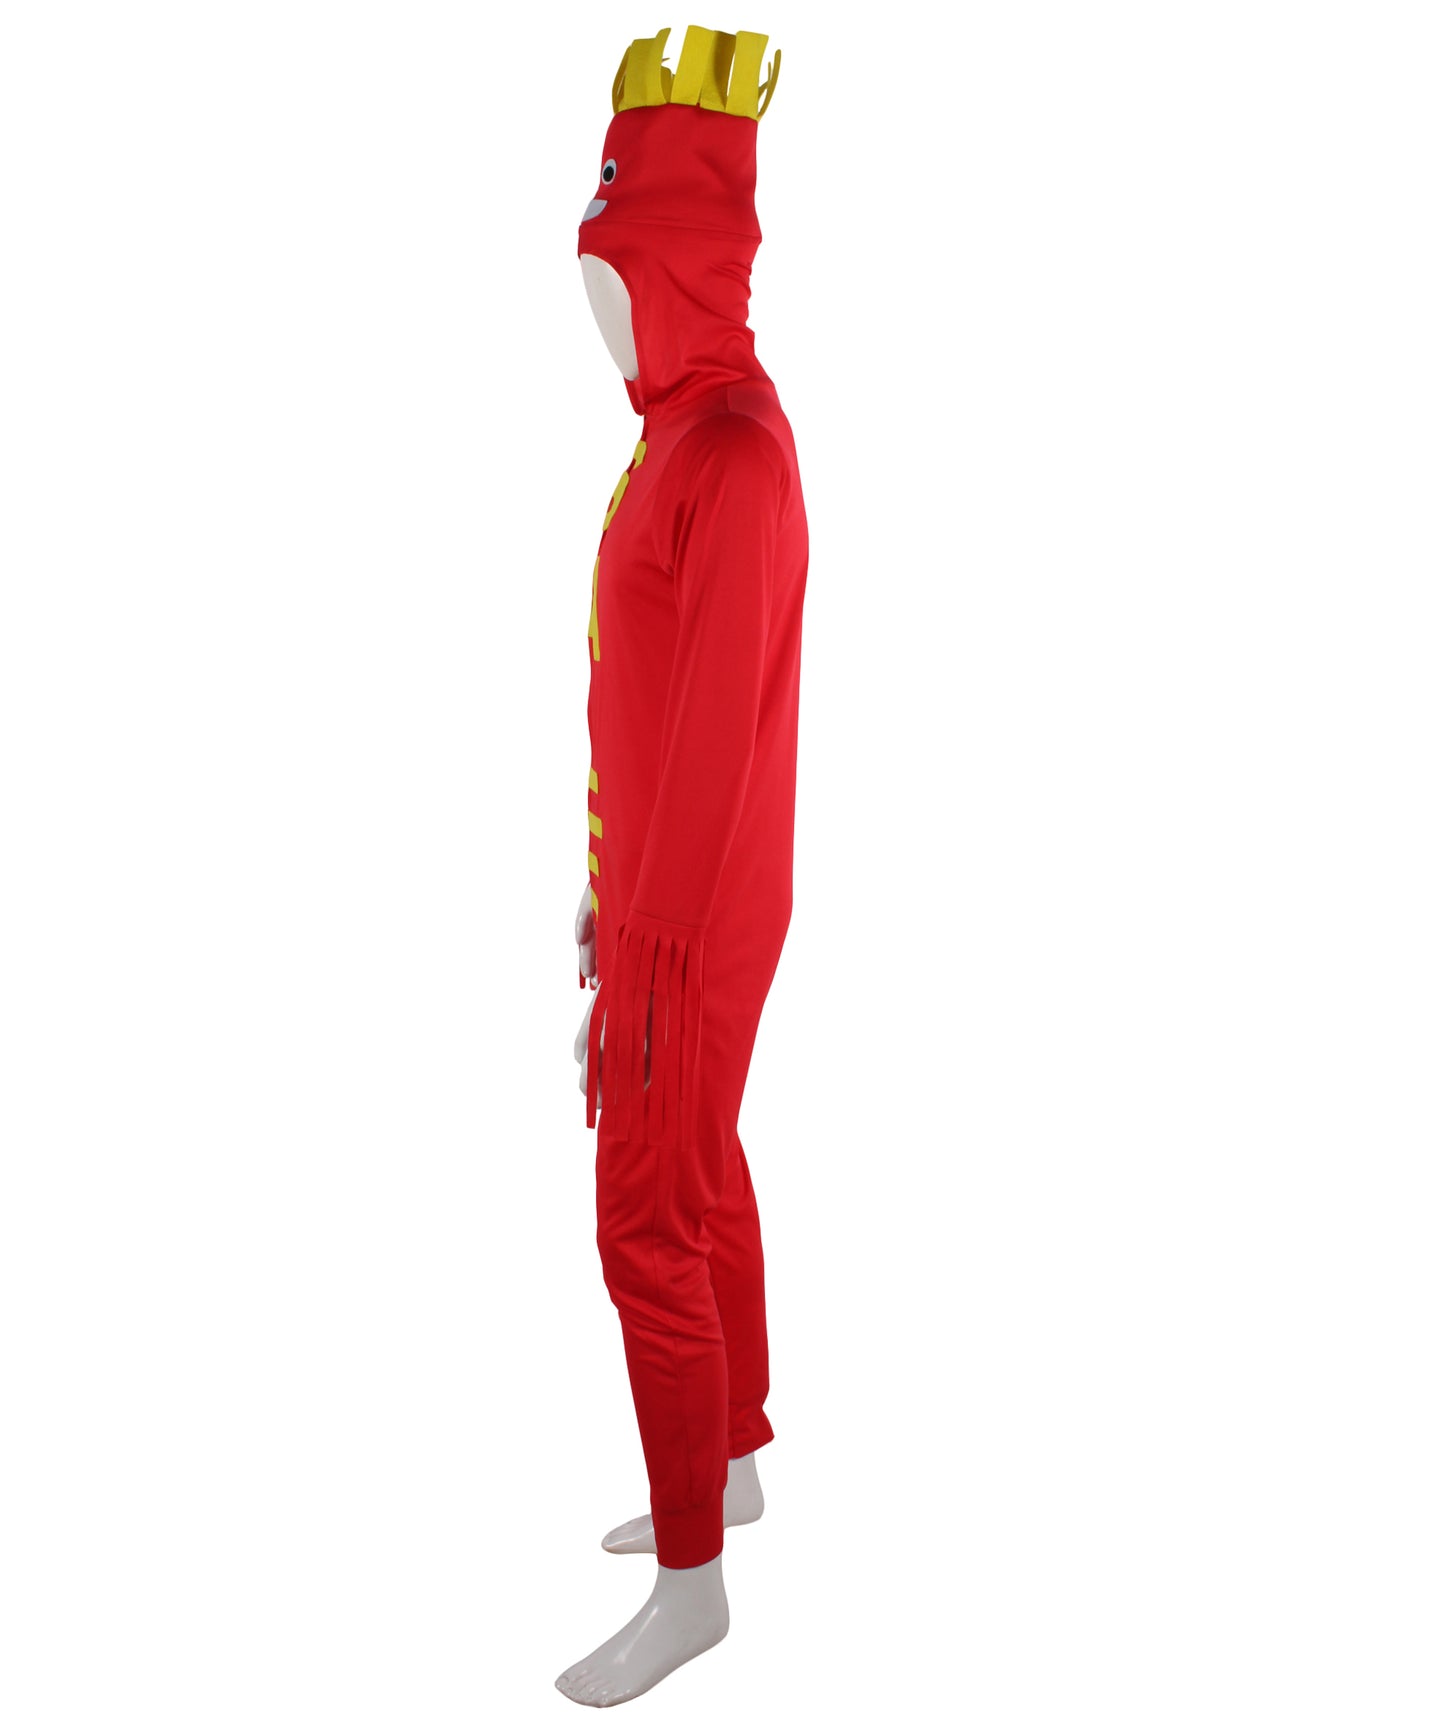 HPO Women's Funny Red Elves Costume| Perfect for Halloween| Flame-retardant Synthetic Fabric